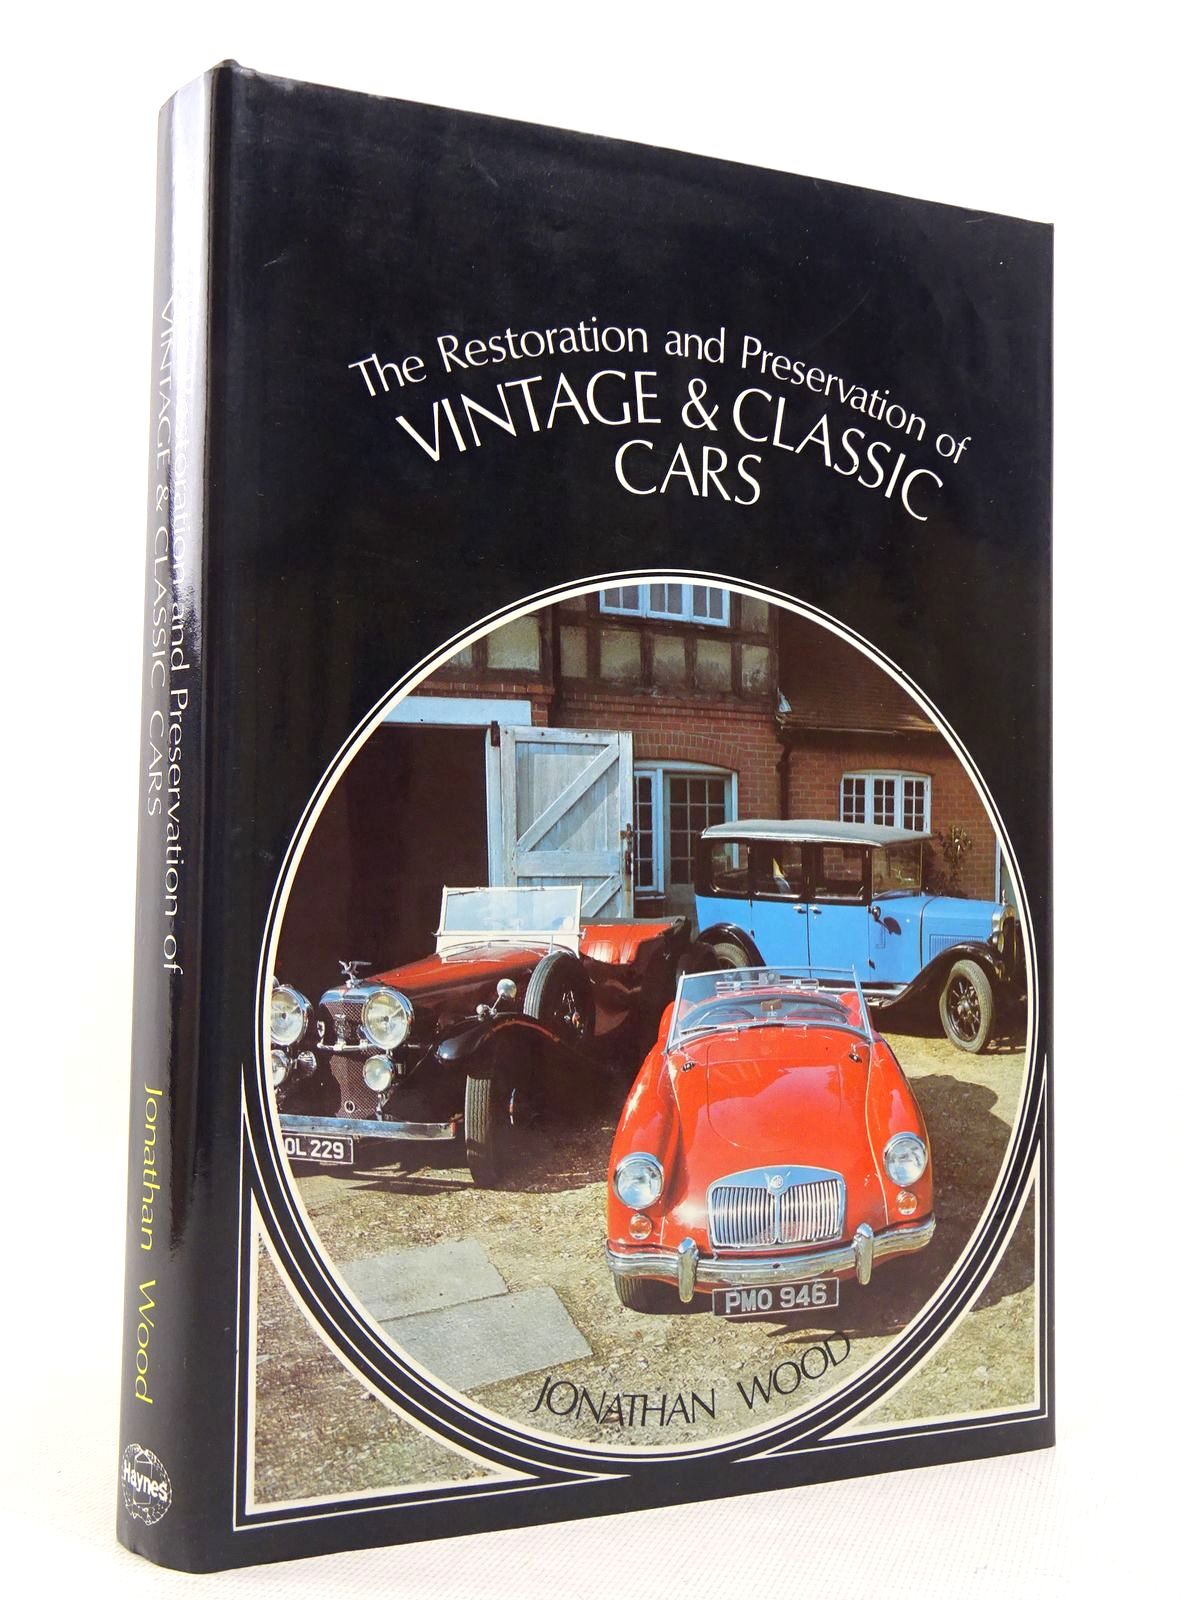 Photo of THE RESTORATION AND PRESERVATION OF VINTAGE & CLASSIC CARS written by Wood, Jonathan published by Haynes (STOCK CODE: 1817146)  for sale by Stella & Rose's Books